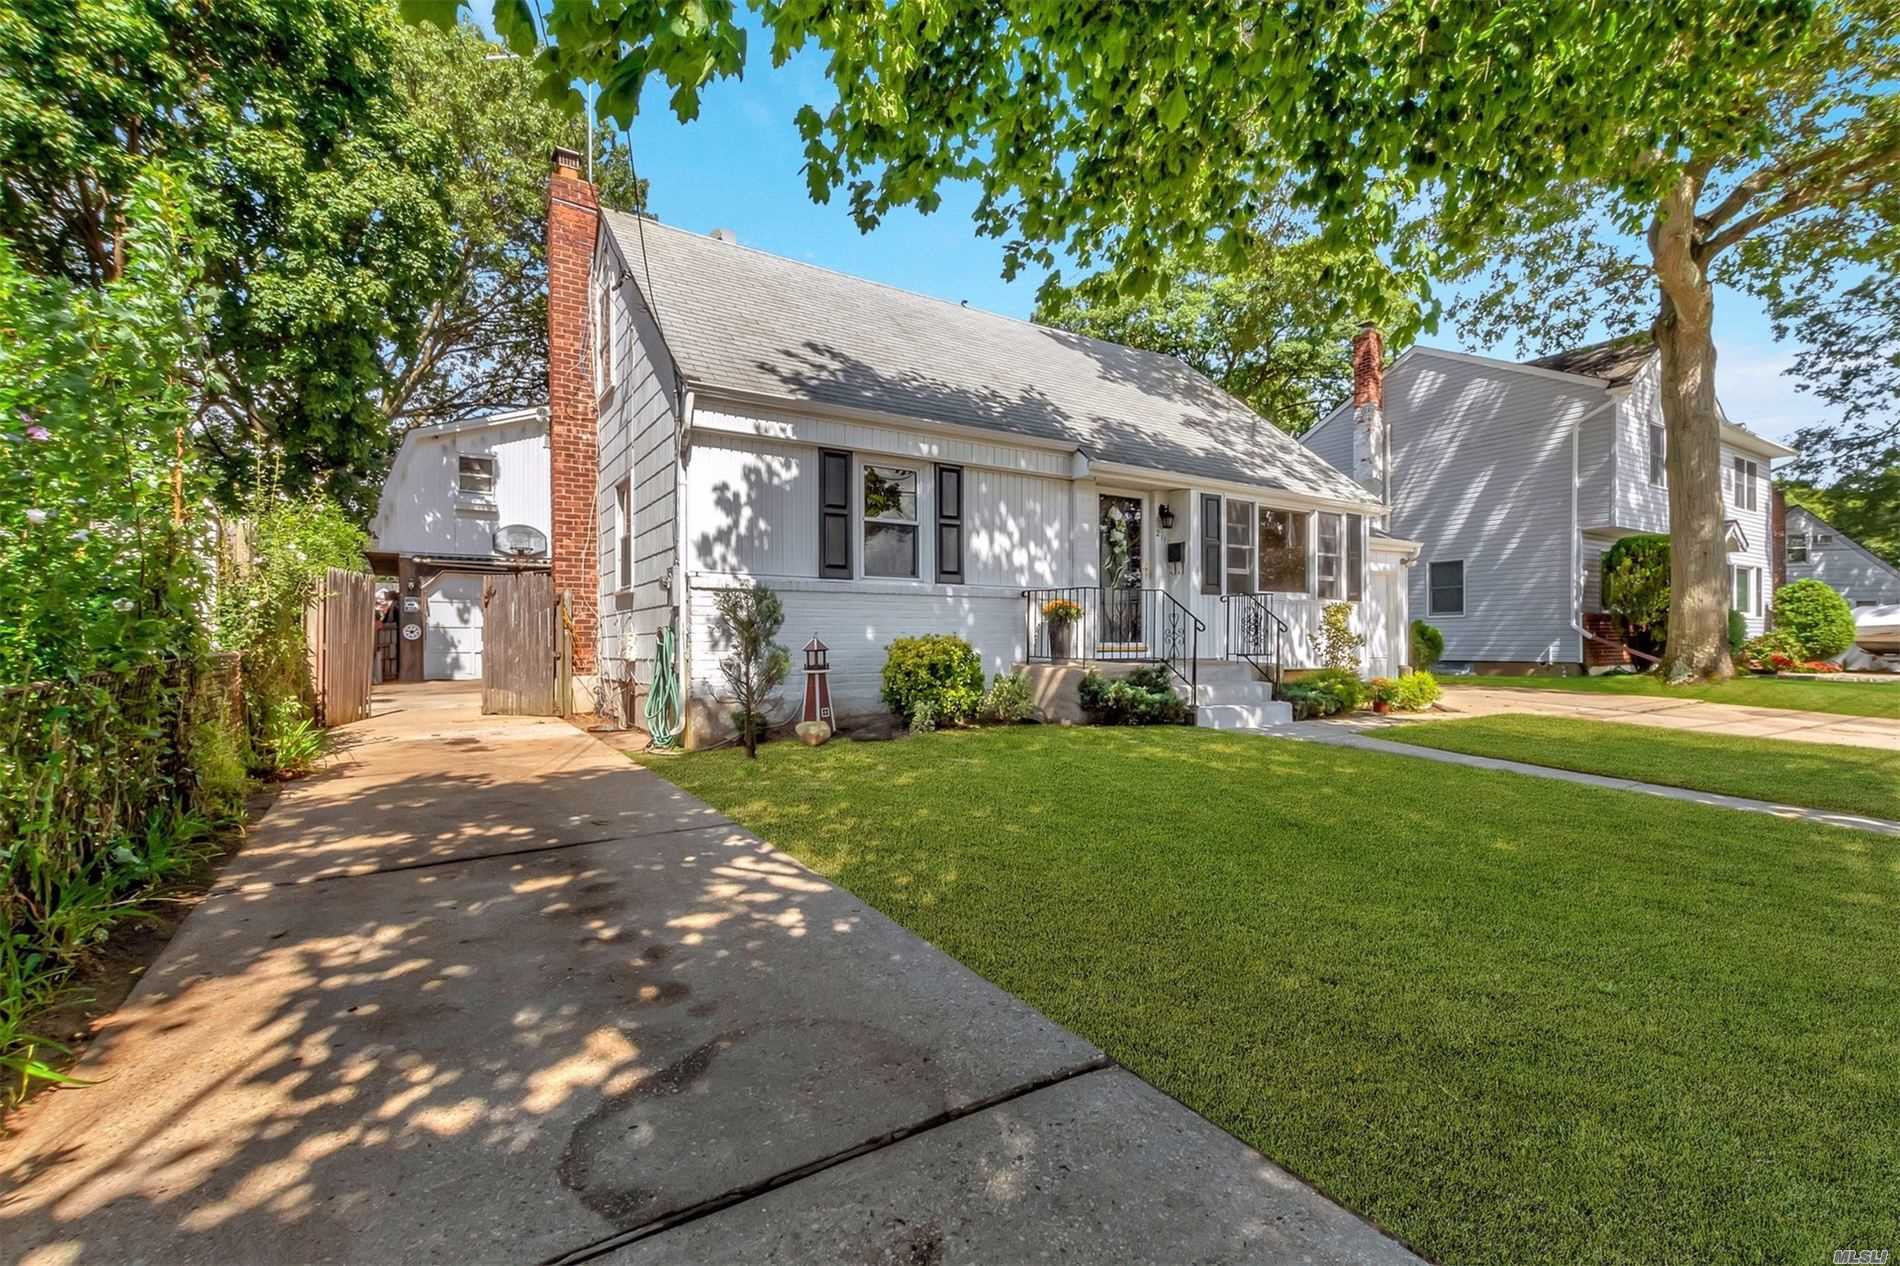 Wonderful 5 bedroom cape in the Village of Massapequa Park. Hardwood floors. Large living spaces. Generous sized bedrooms. Full basement. And a huge detached 2 story garage. Close to restaurants, shops, and LIRR. SD #23 Massapequa.